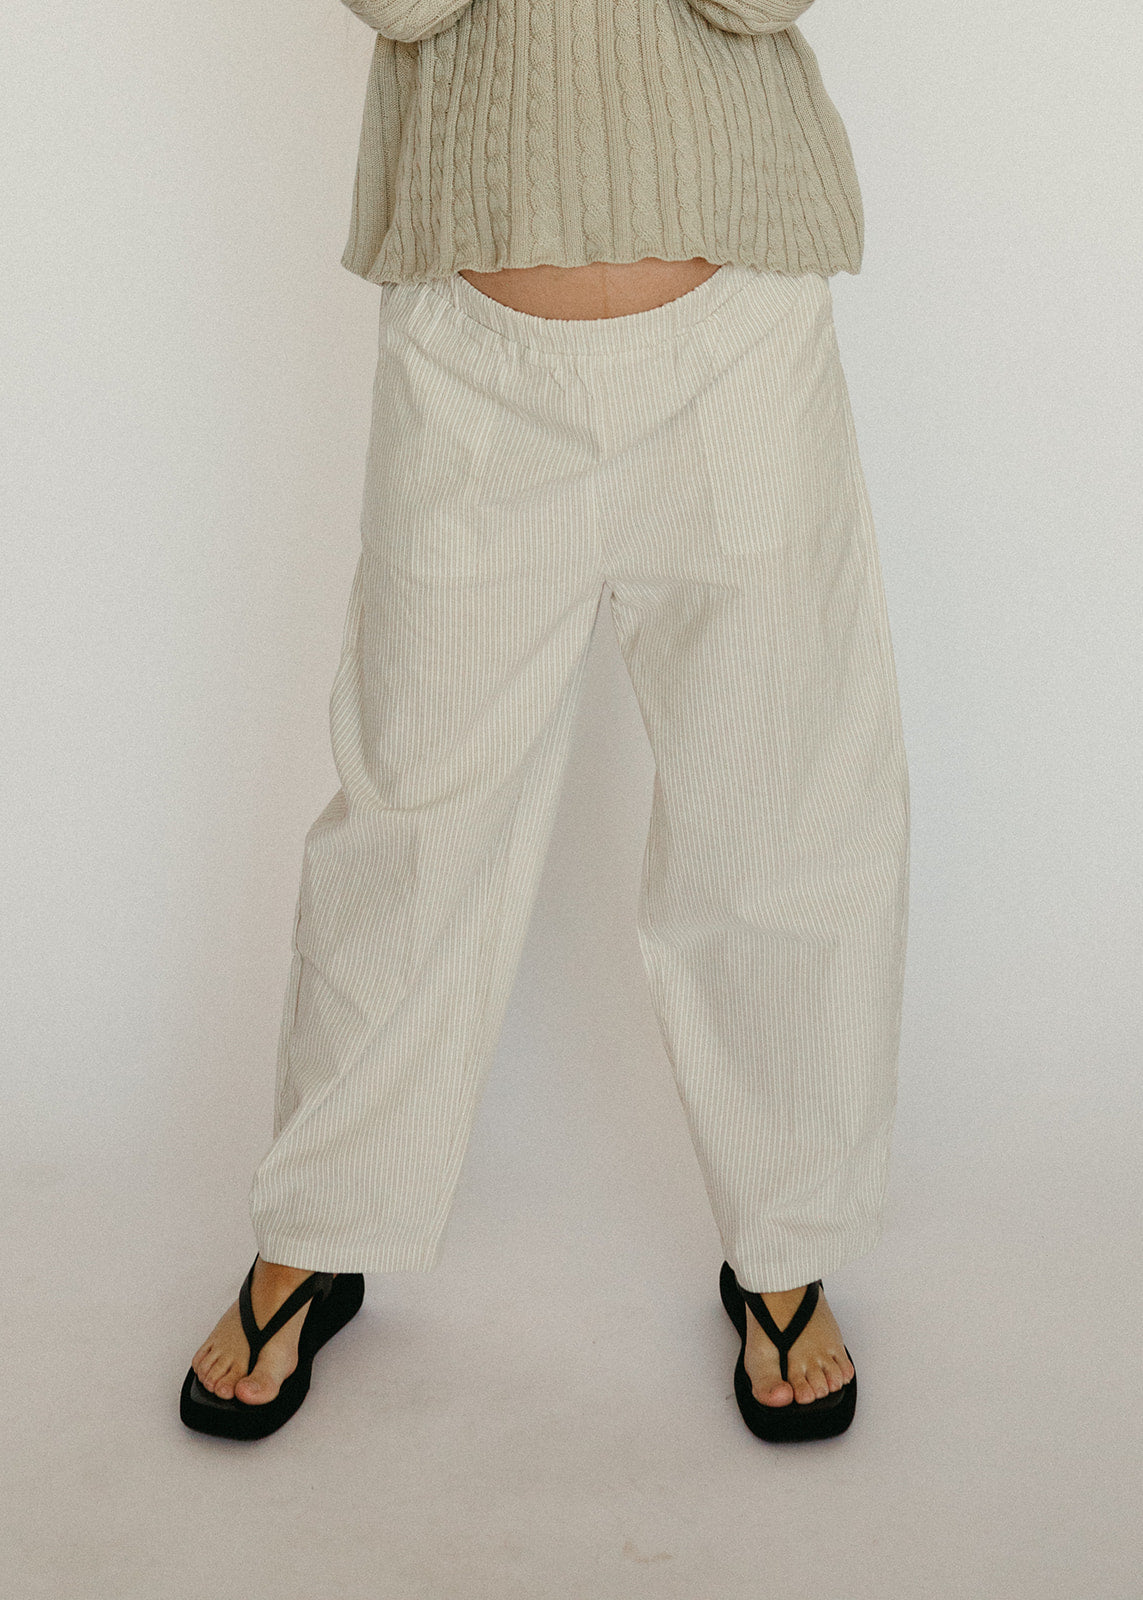 The Arch Pants - Striped